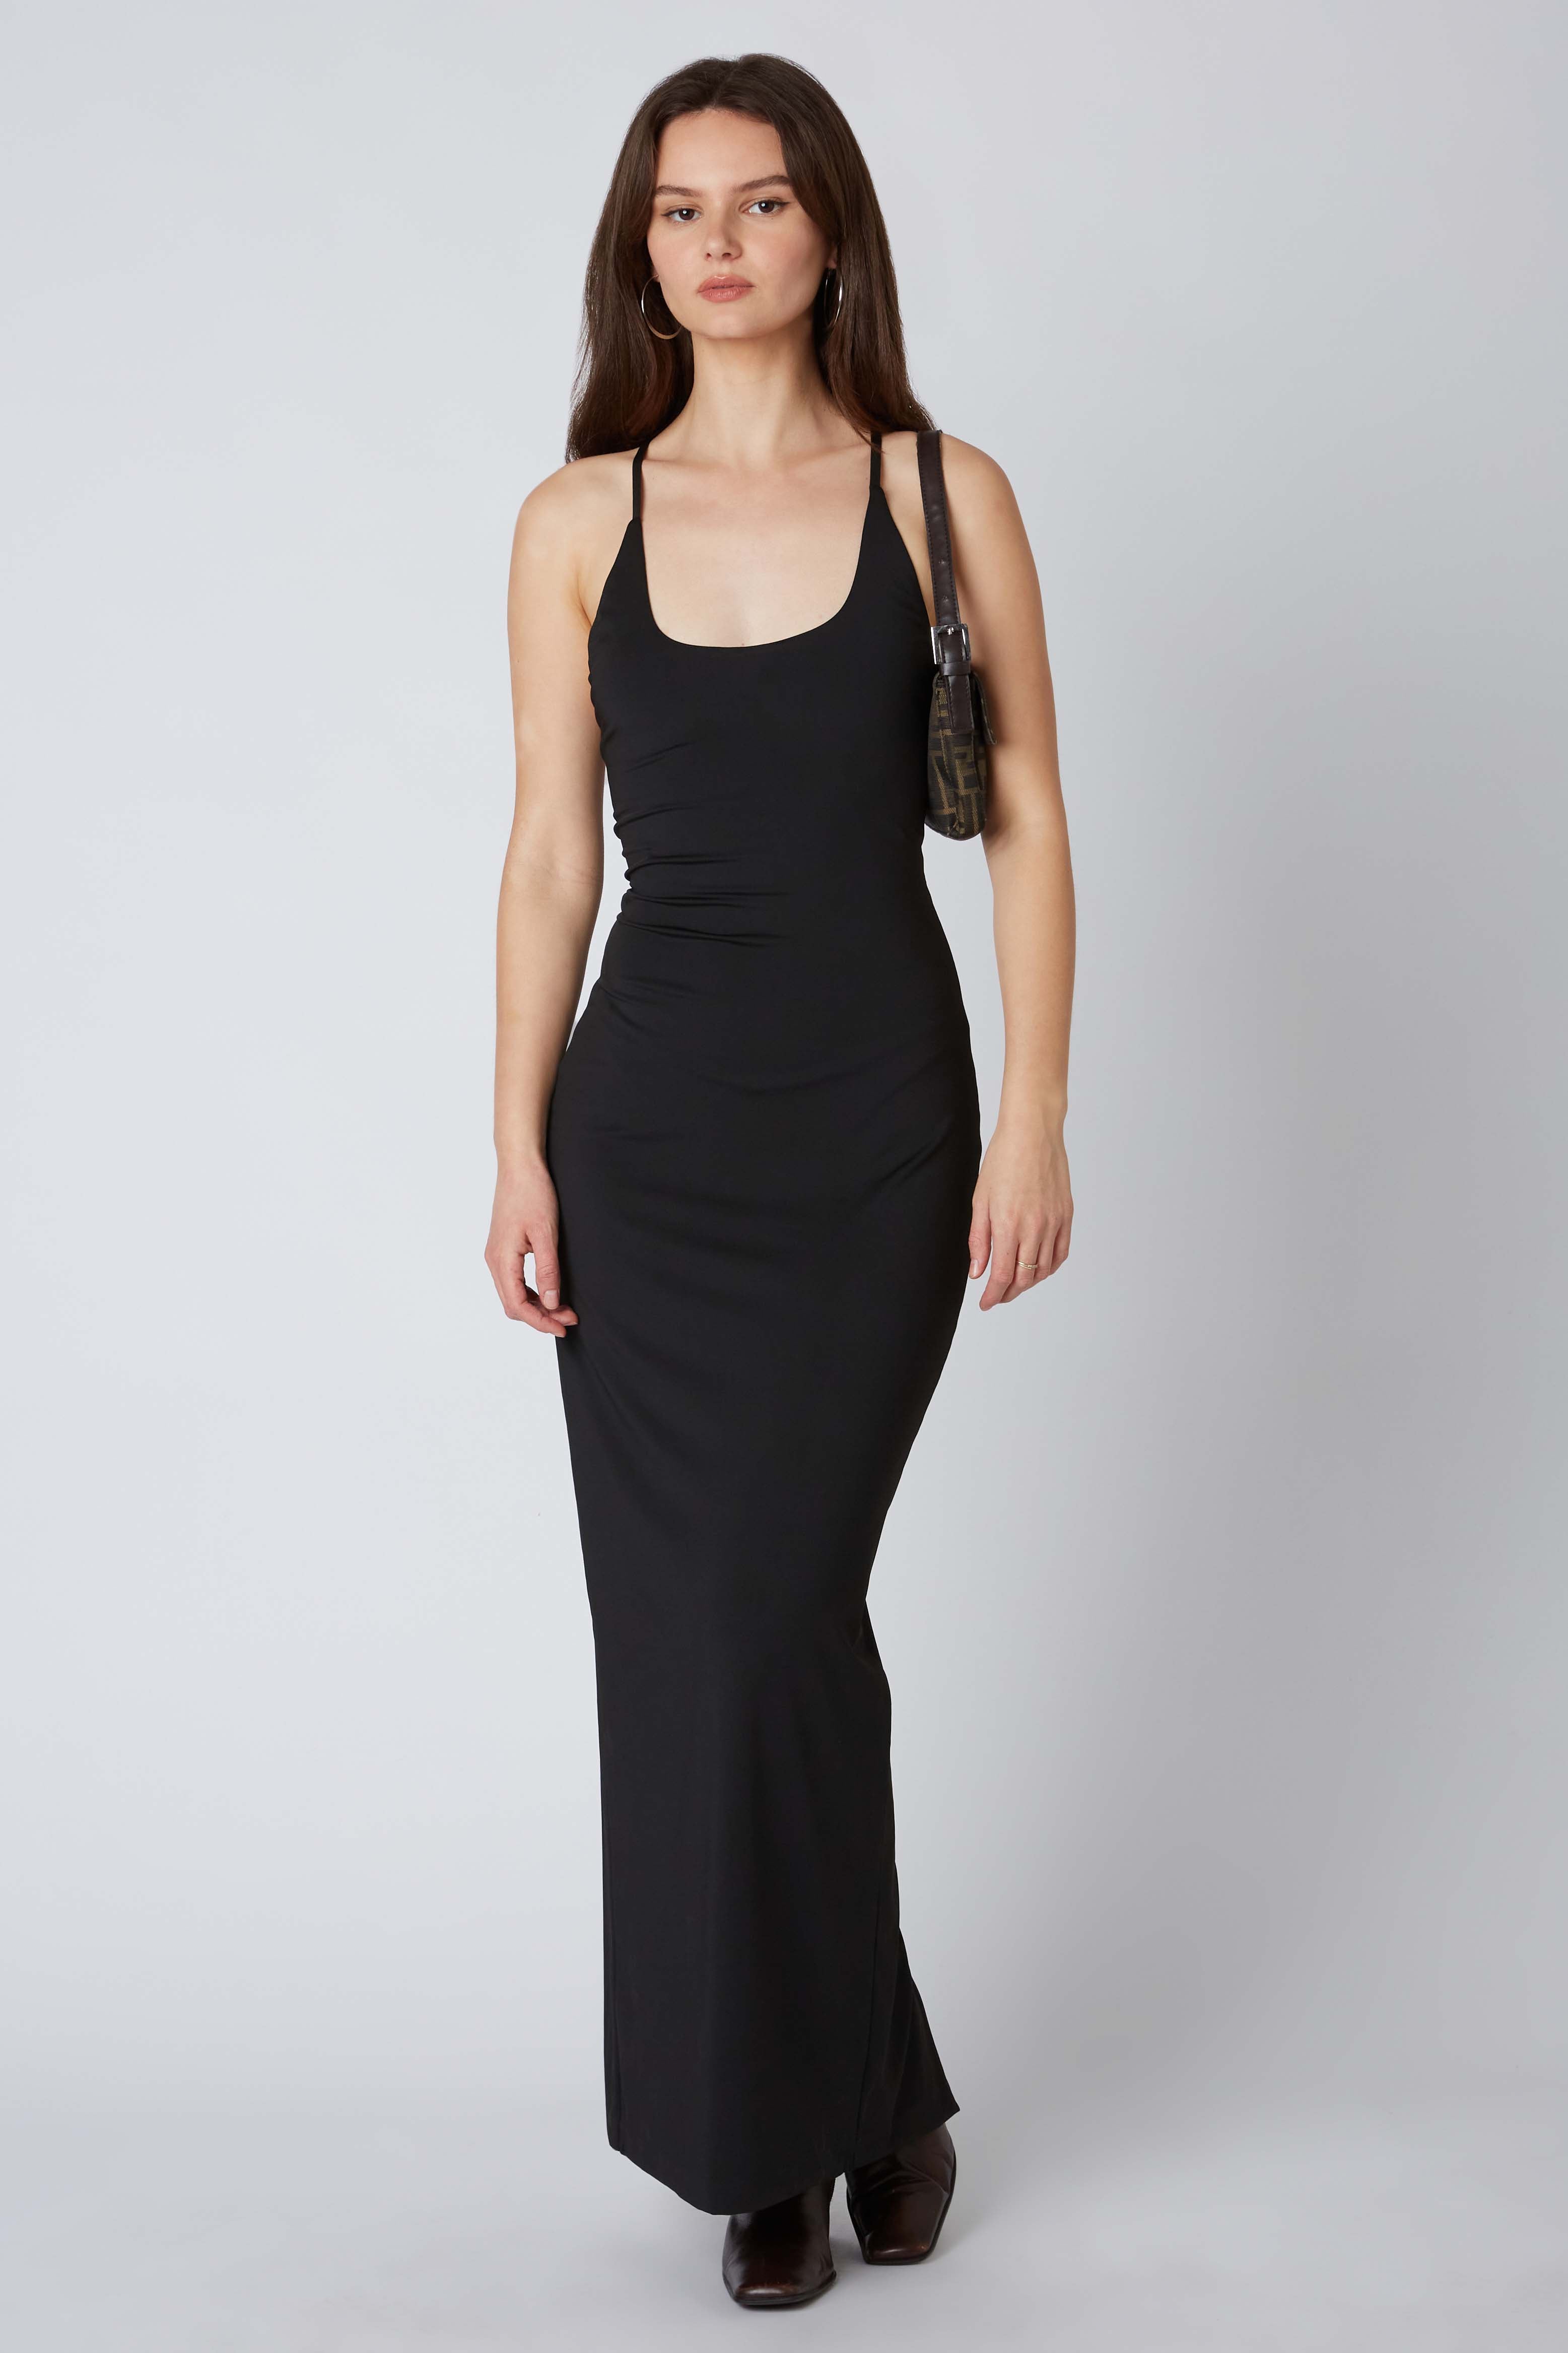 Knit Bodycon Maxi Dress in Black Front View